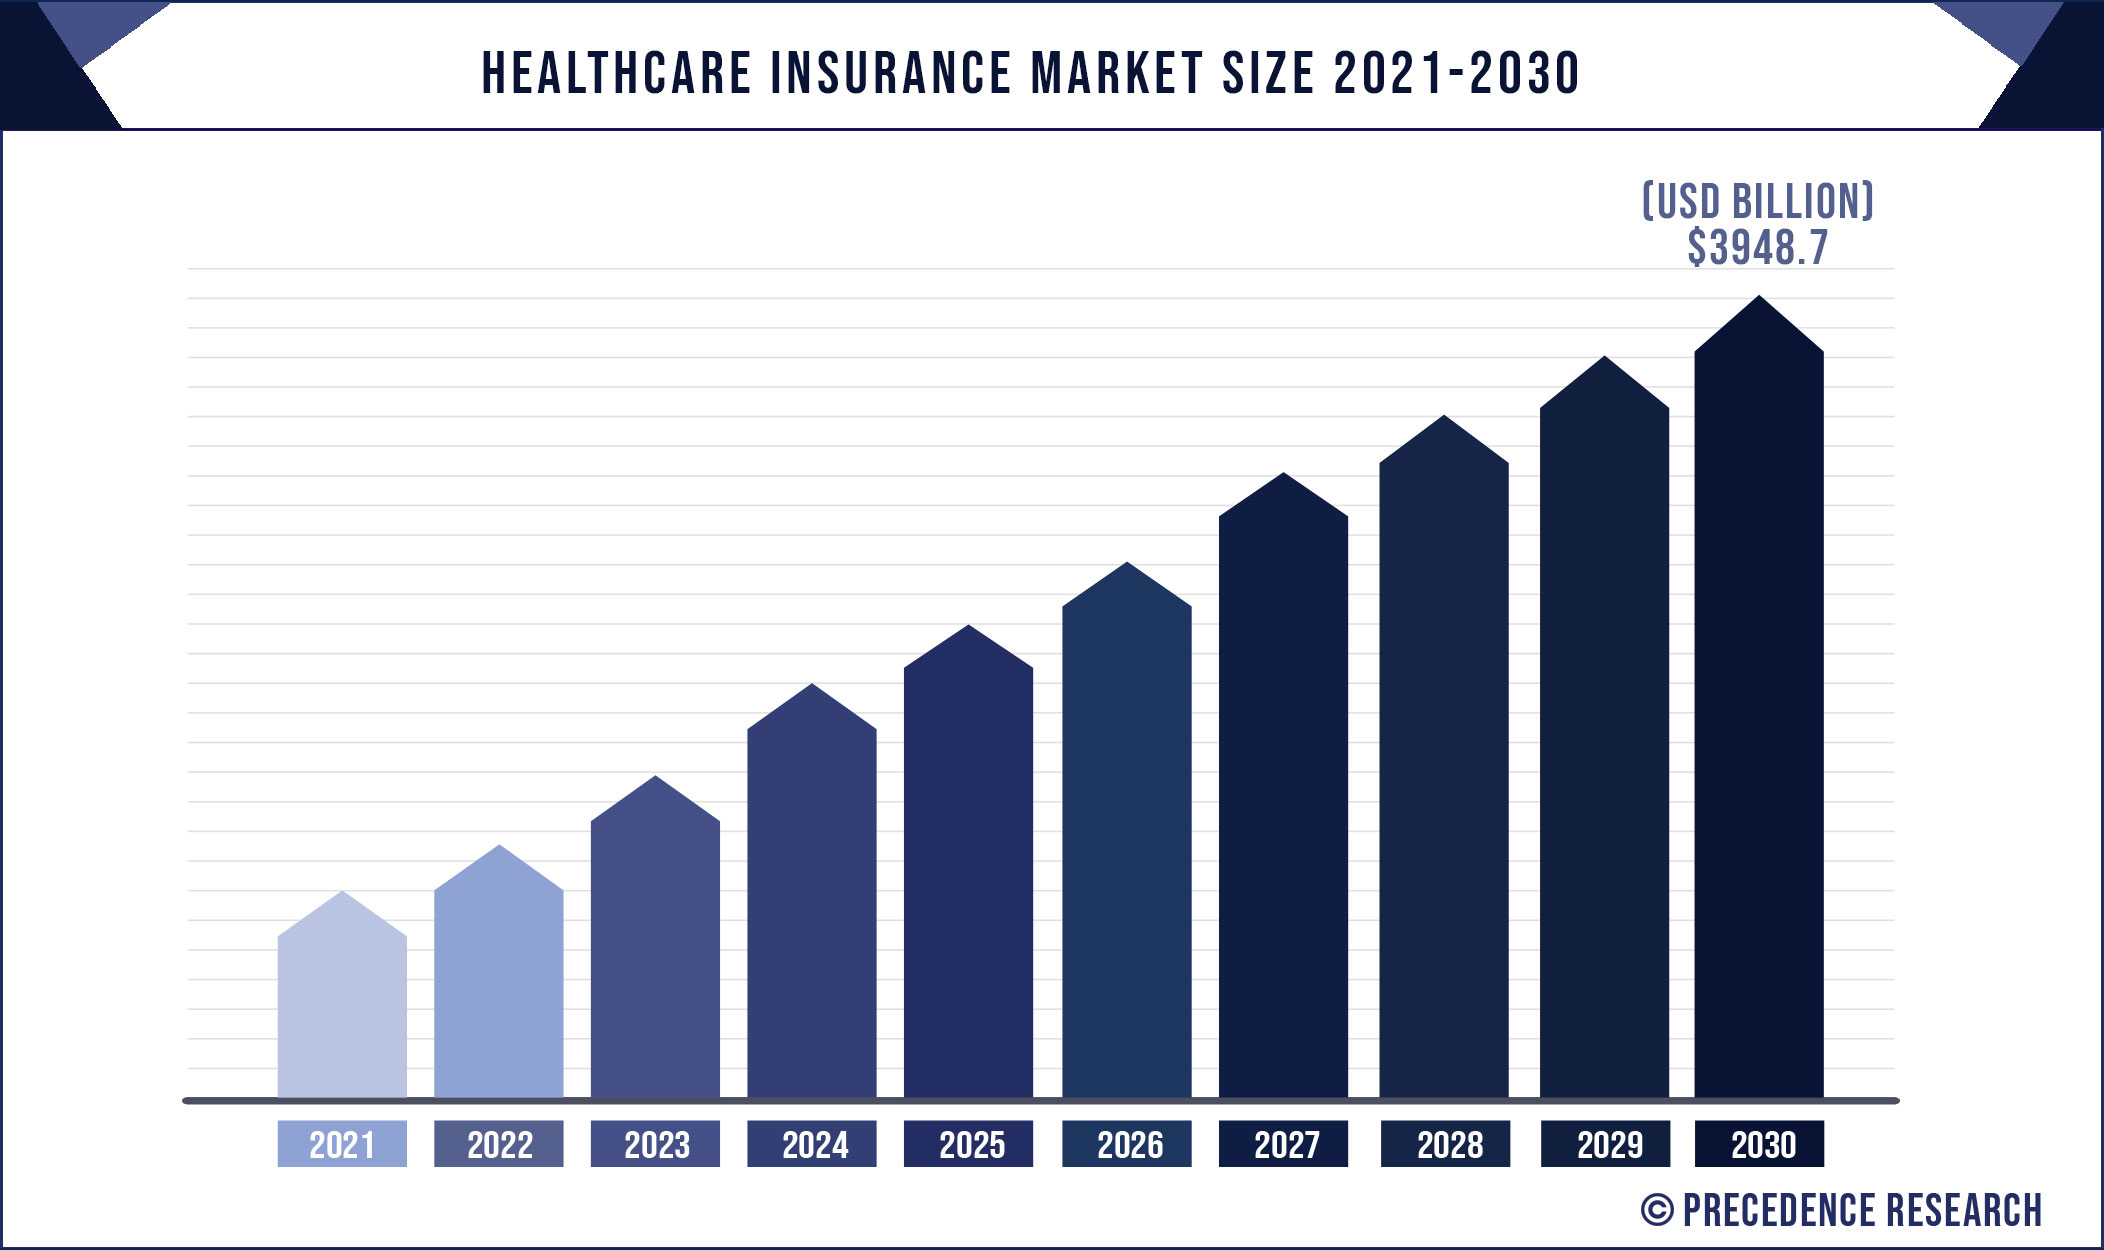 Healthcare Insurance Market to Generate USD 3,948.7 Billion by 2030